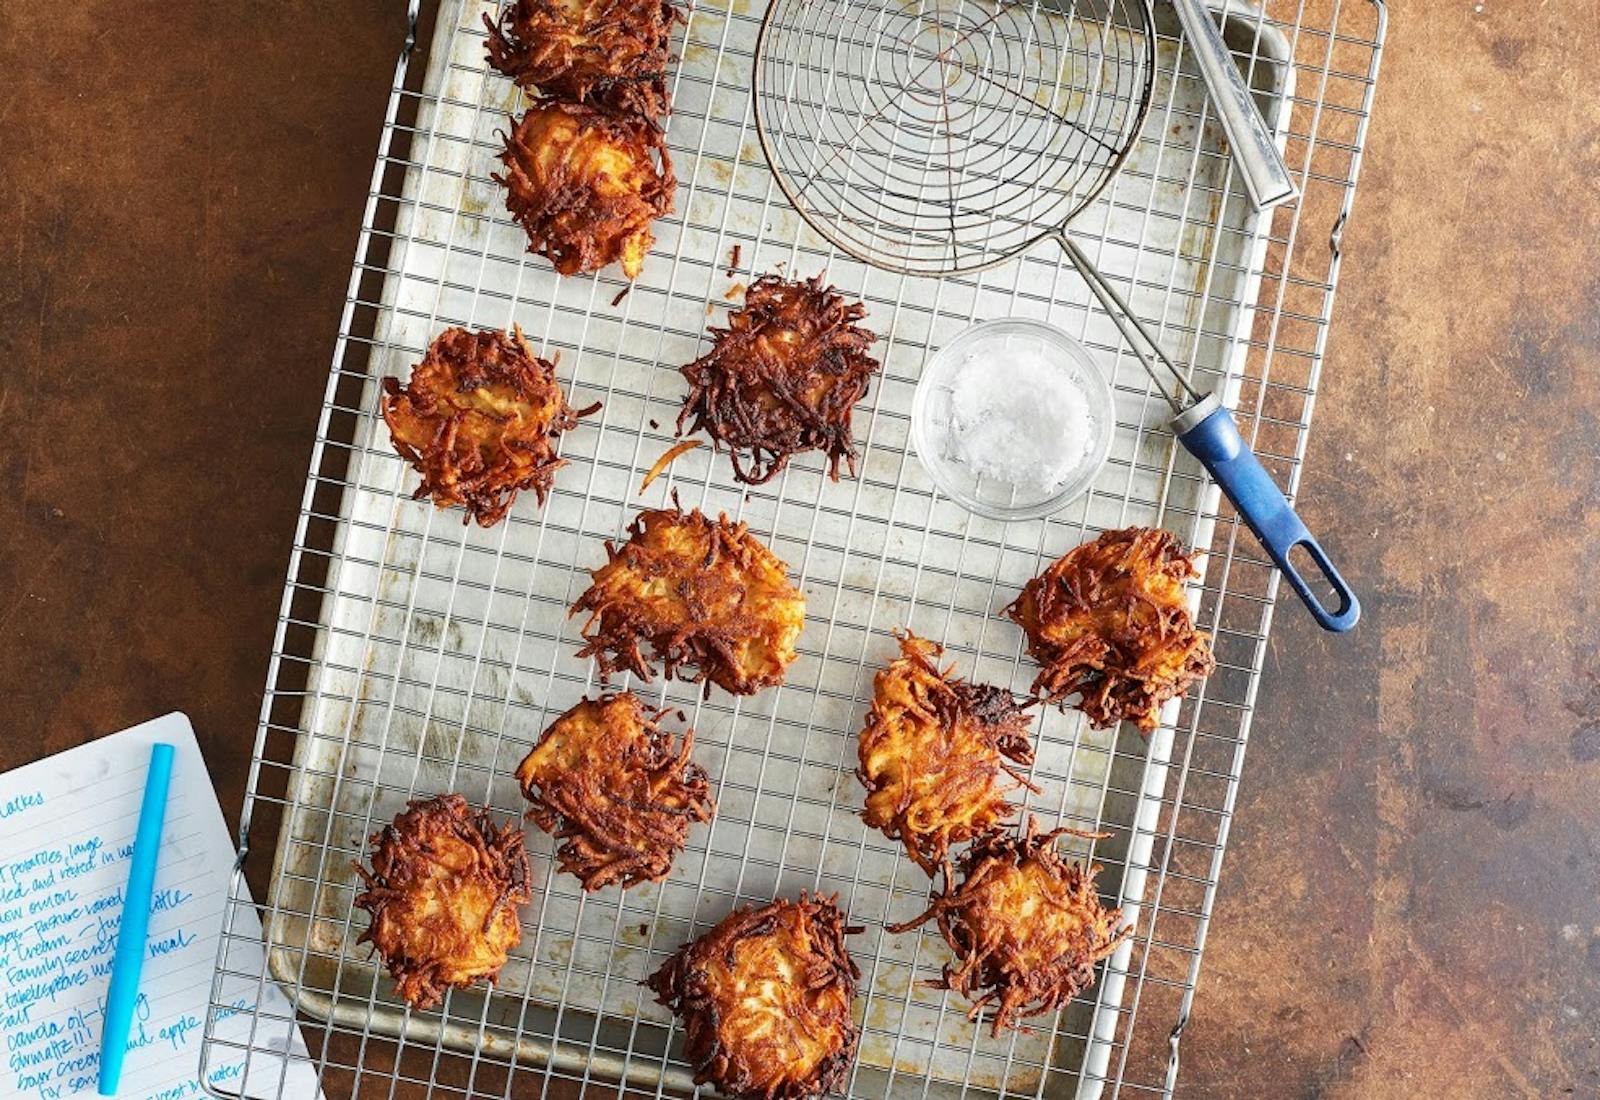 Fried latkes draining on metal rack with dish of coarse salt and handwritten recipe atop brown surface. 